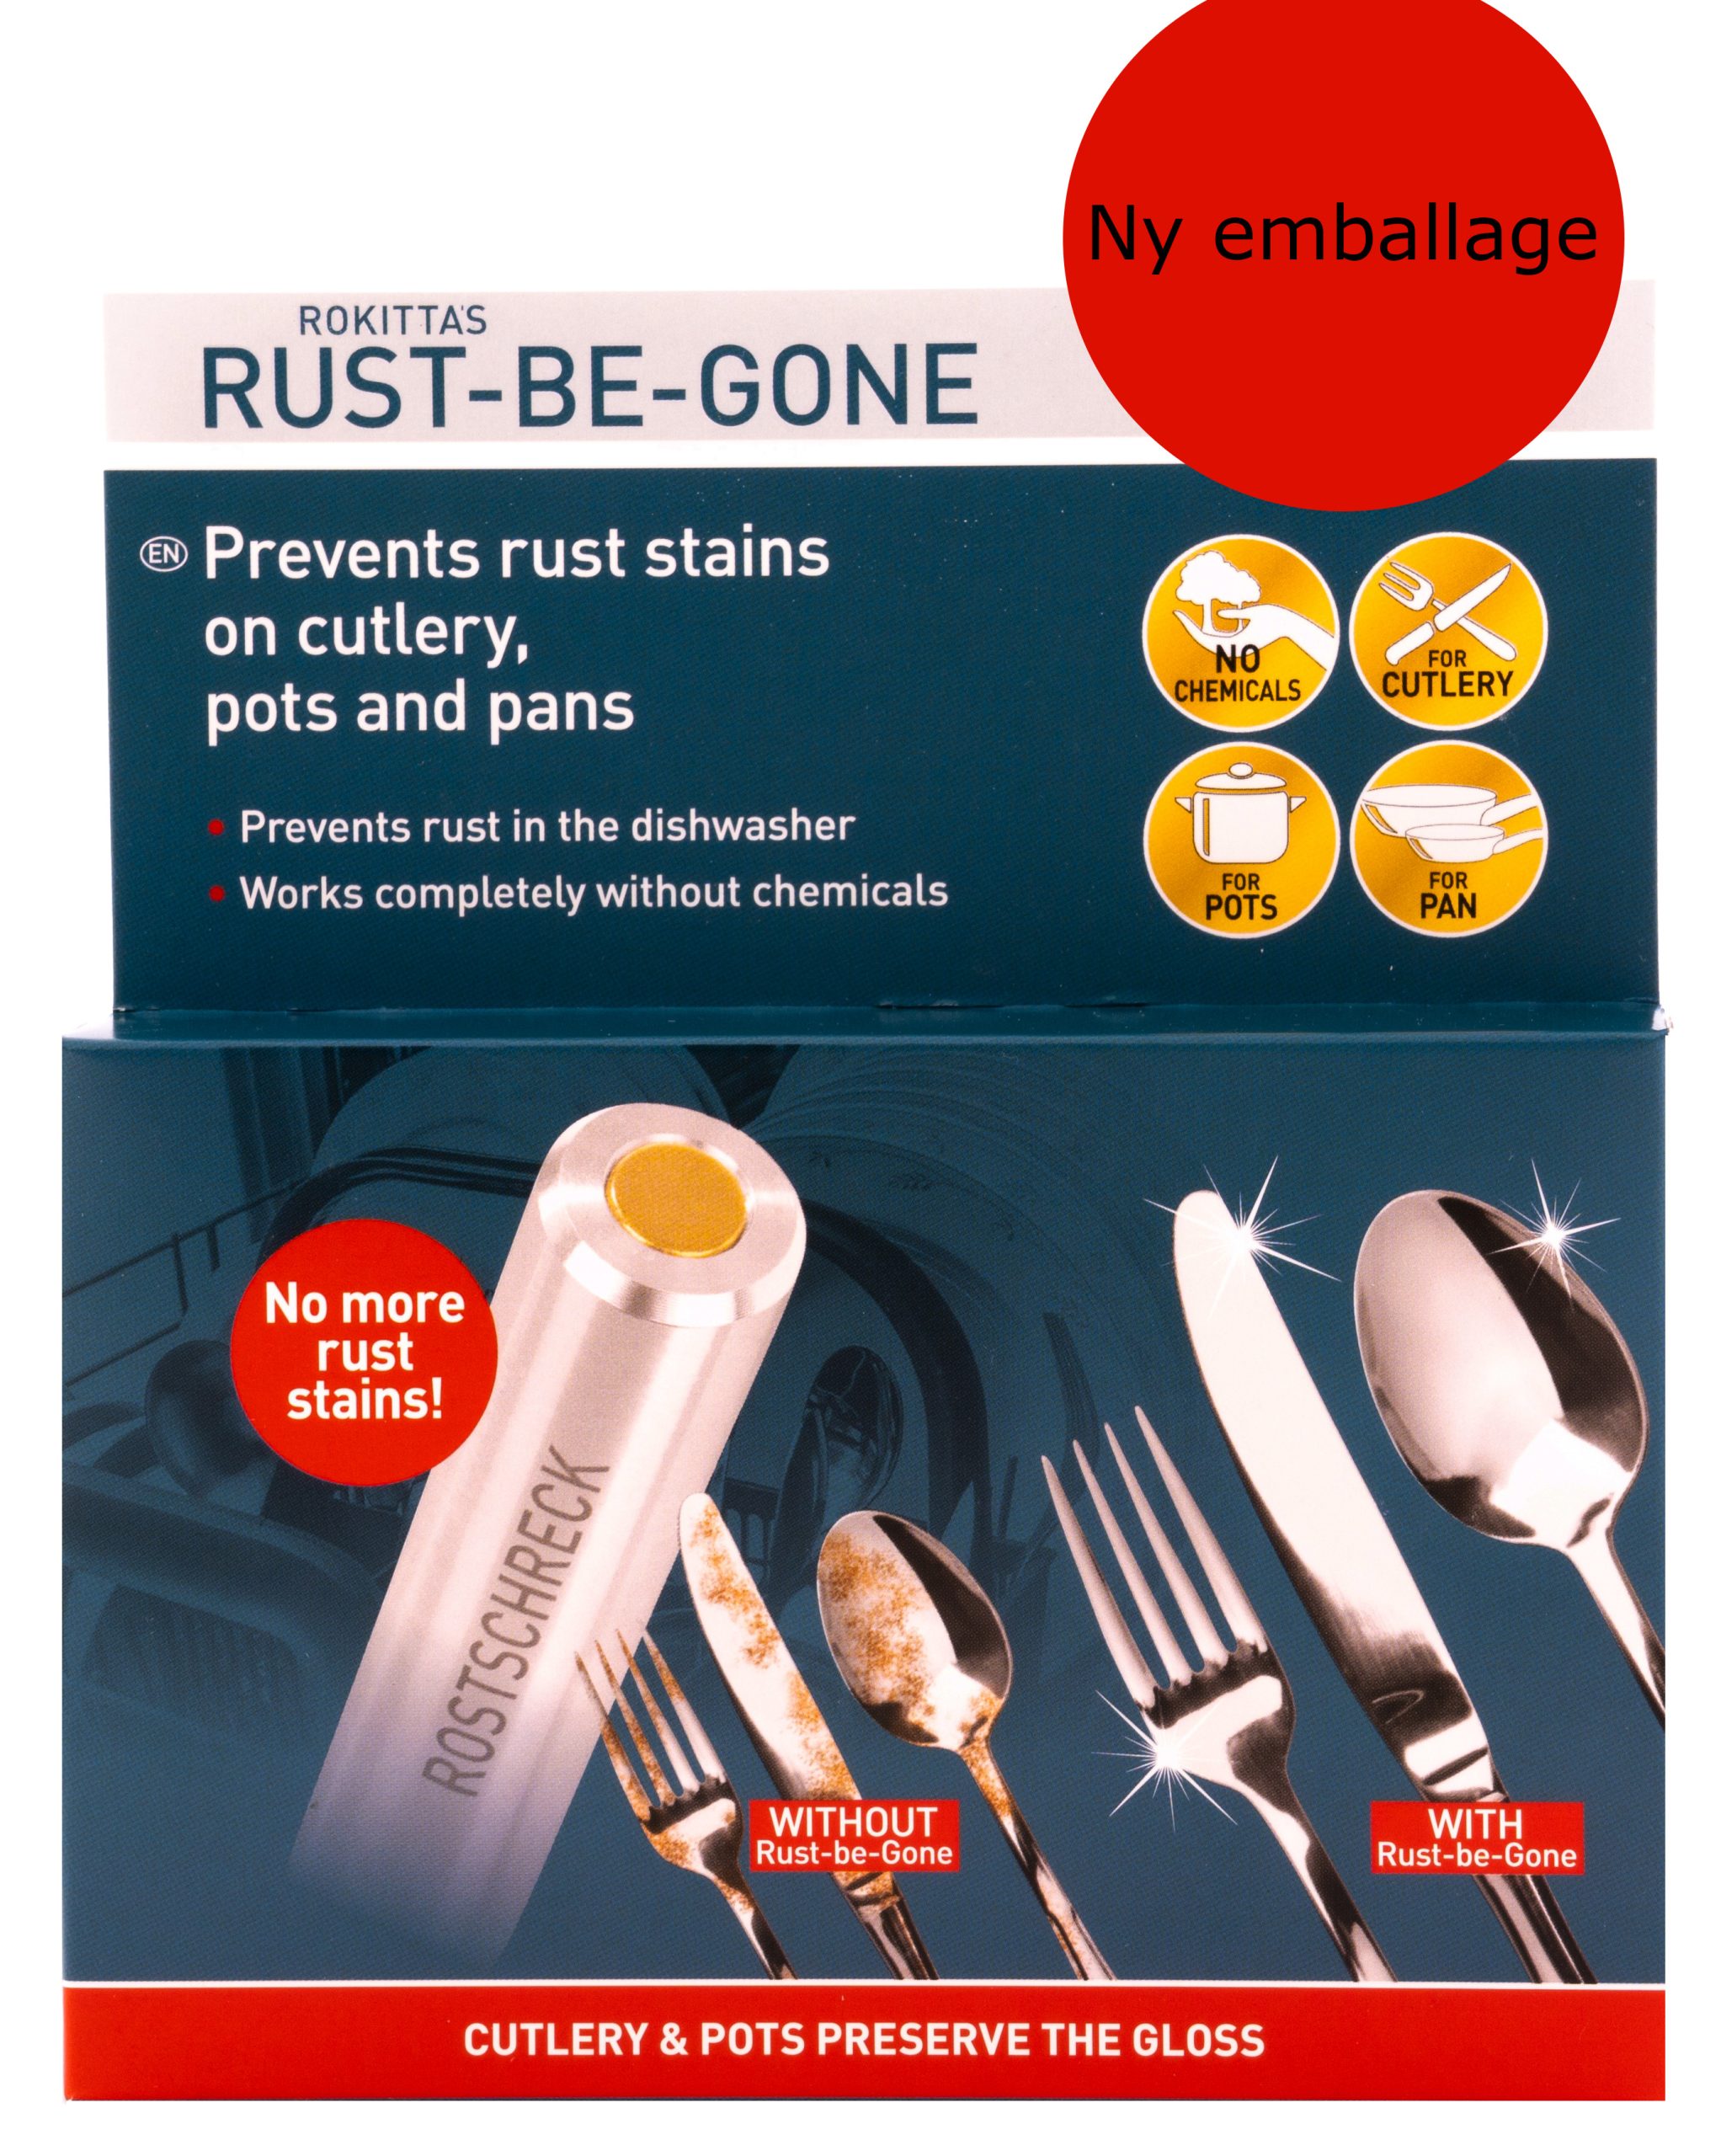 be gone - Rust gone